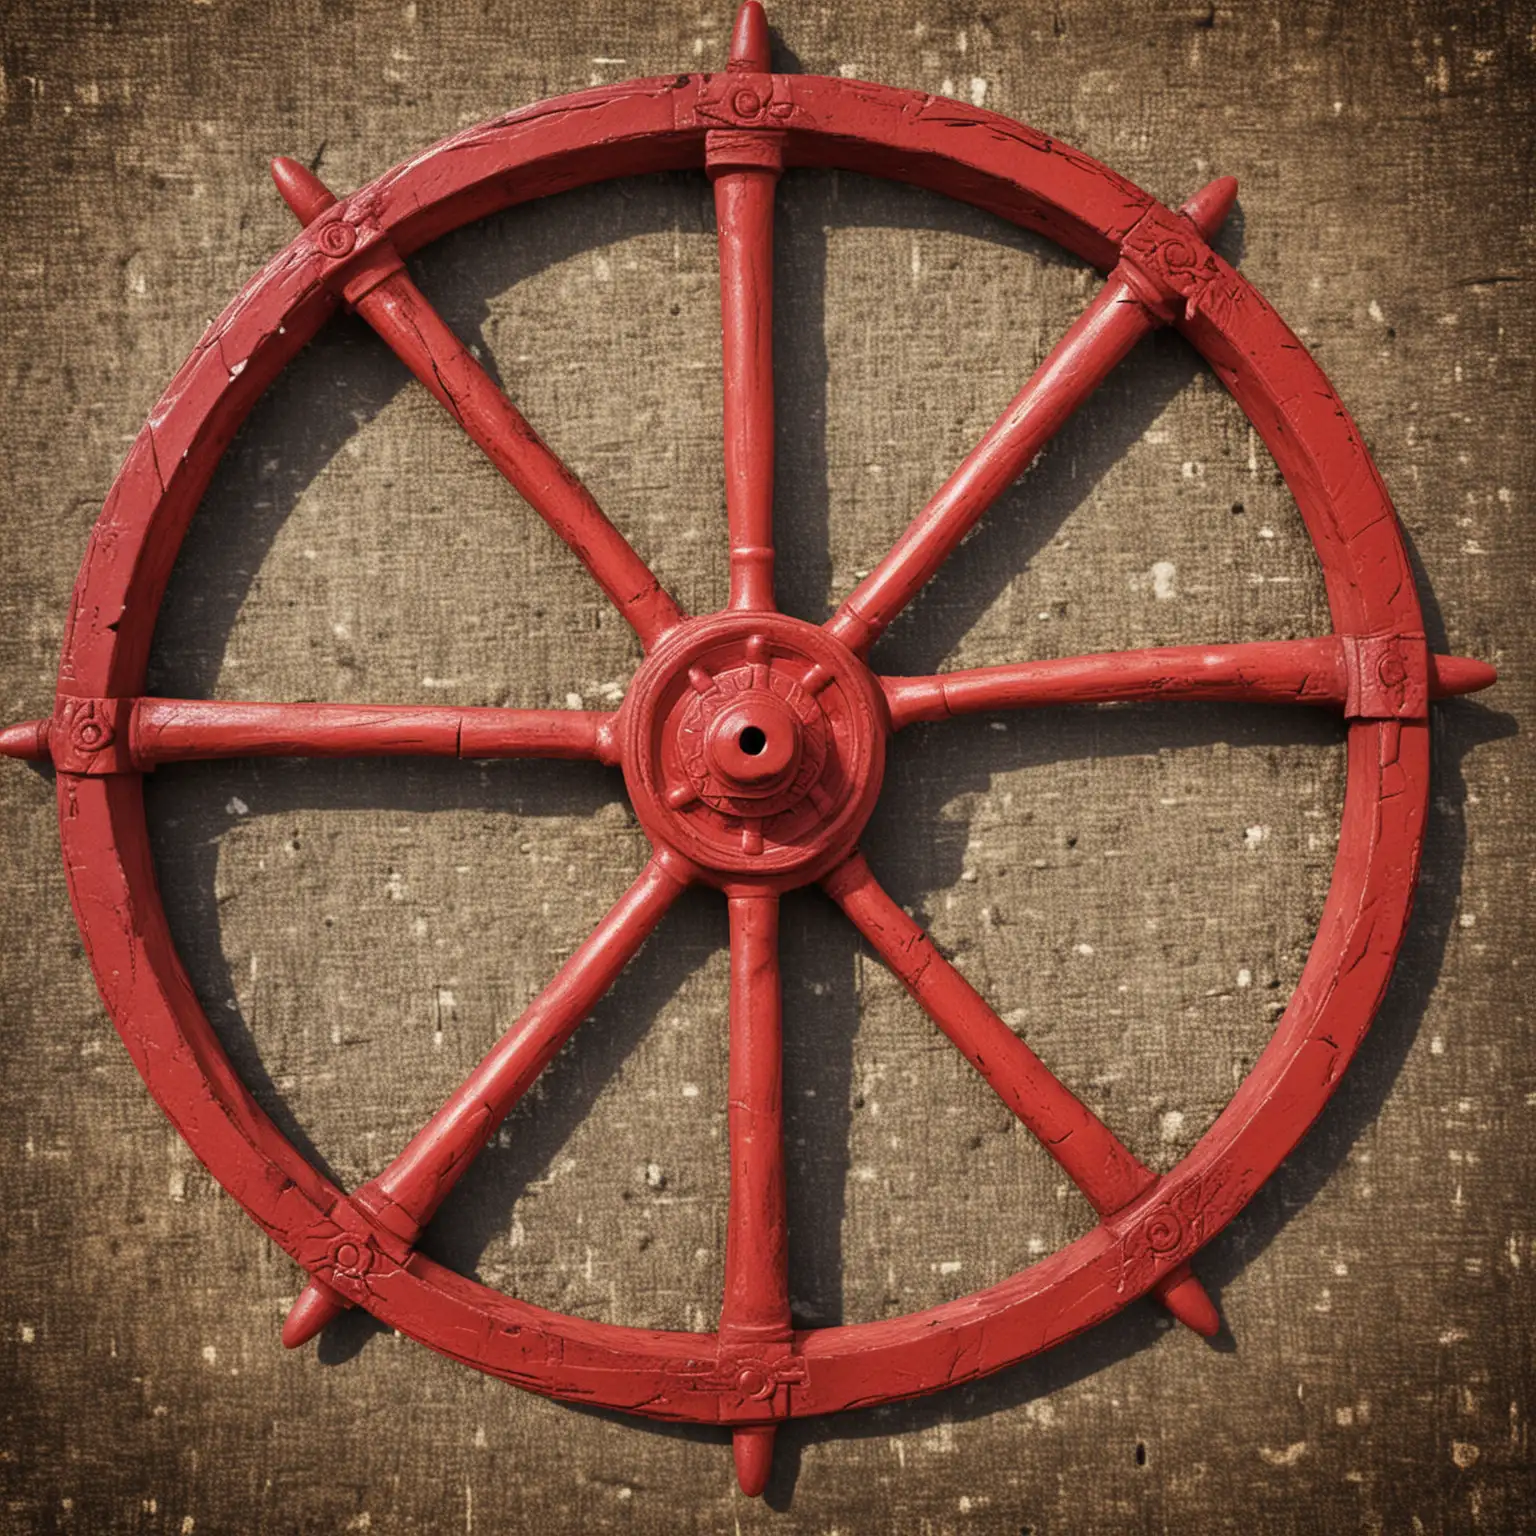 Vintage Red Wagon Wheel Symbolizing the Passage of Time